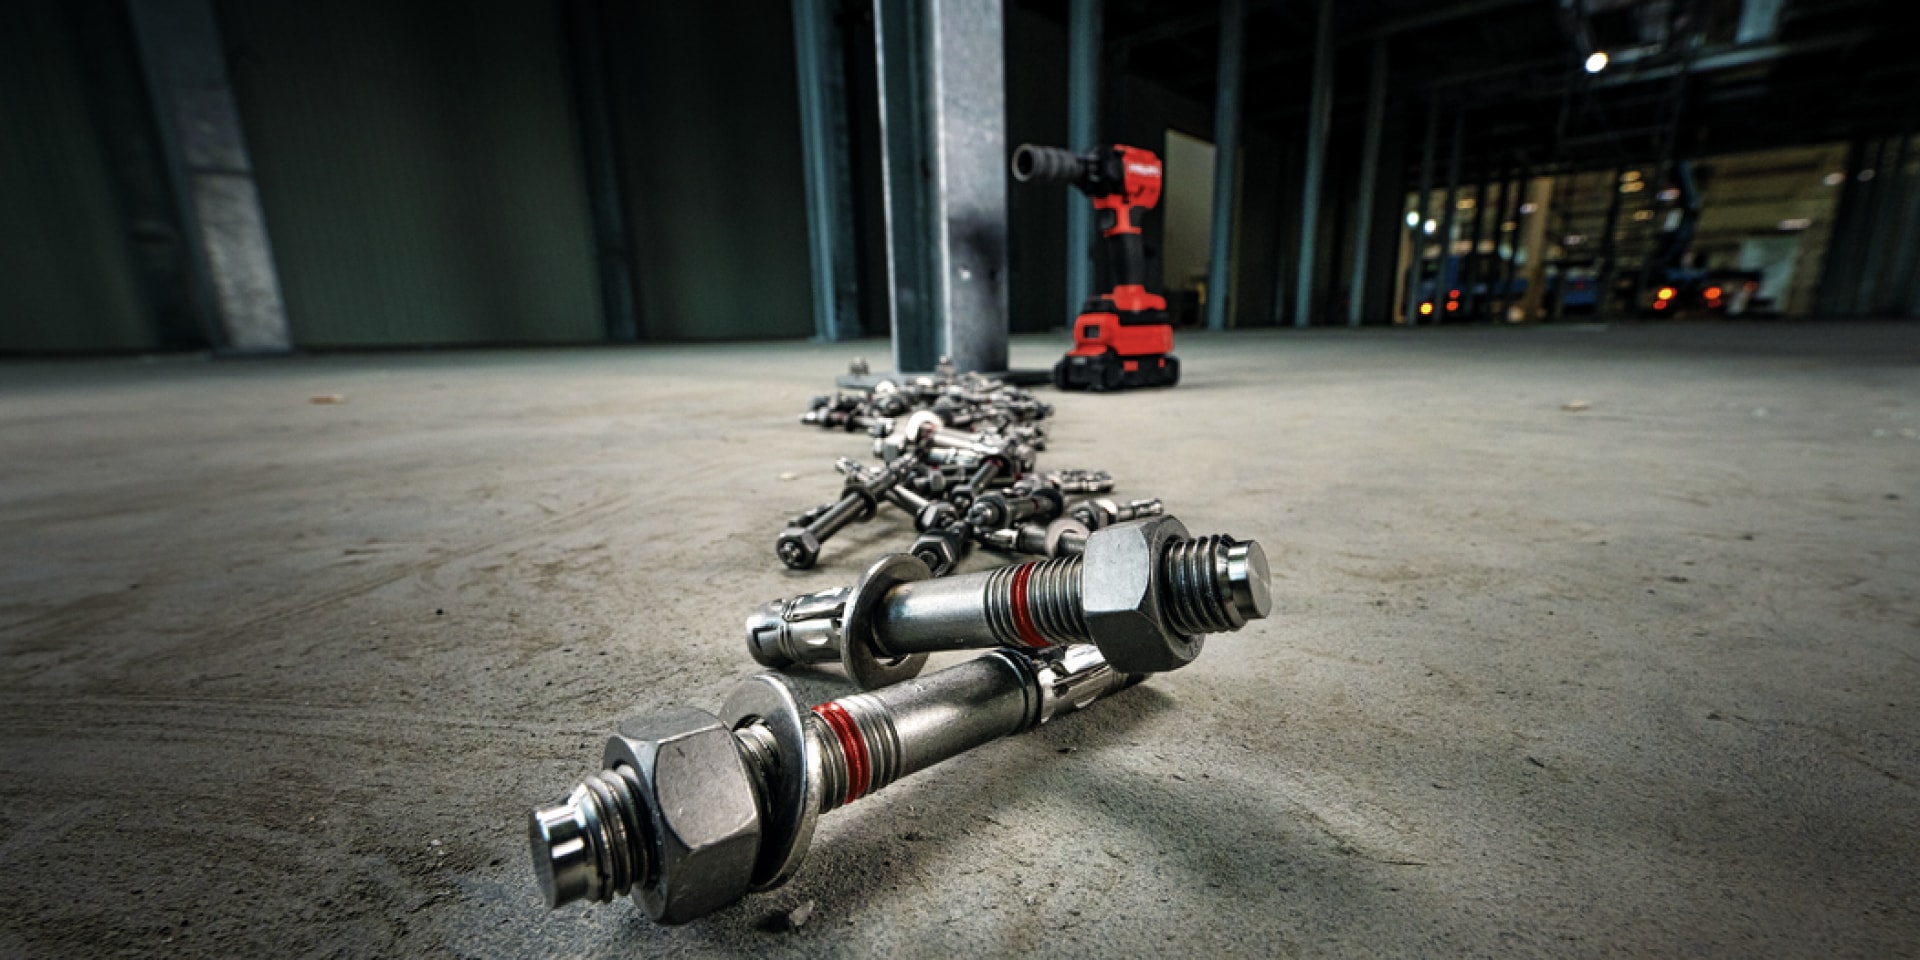 Portfolio image of various HST4 wedge anchors and the cordless impact wrench SIW 6AT-22